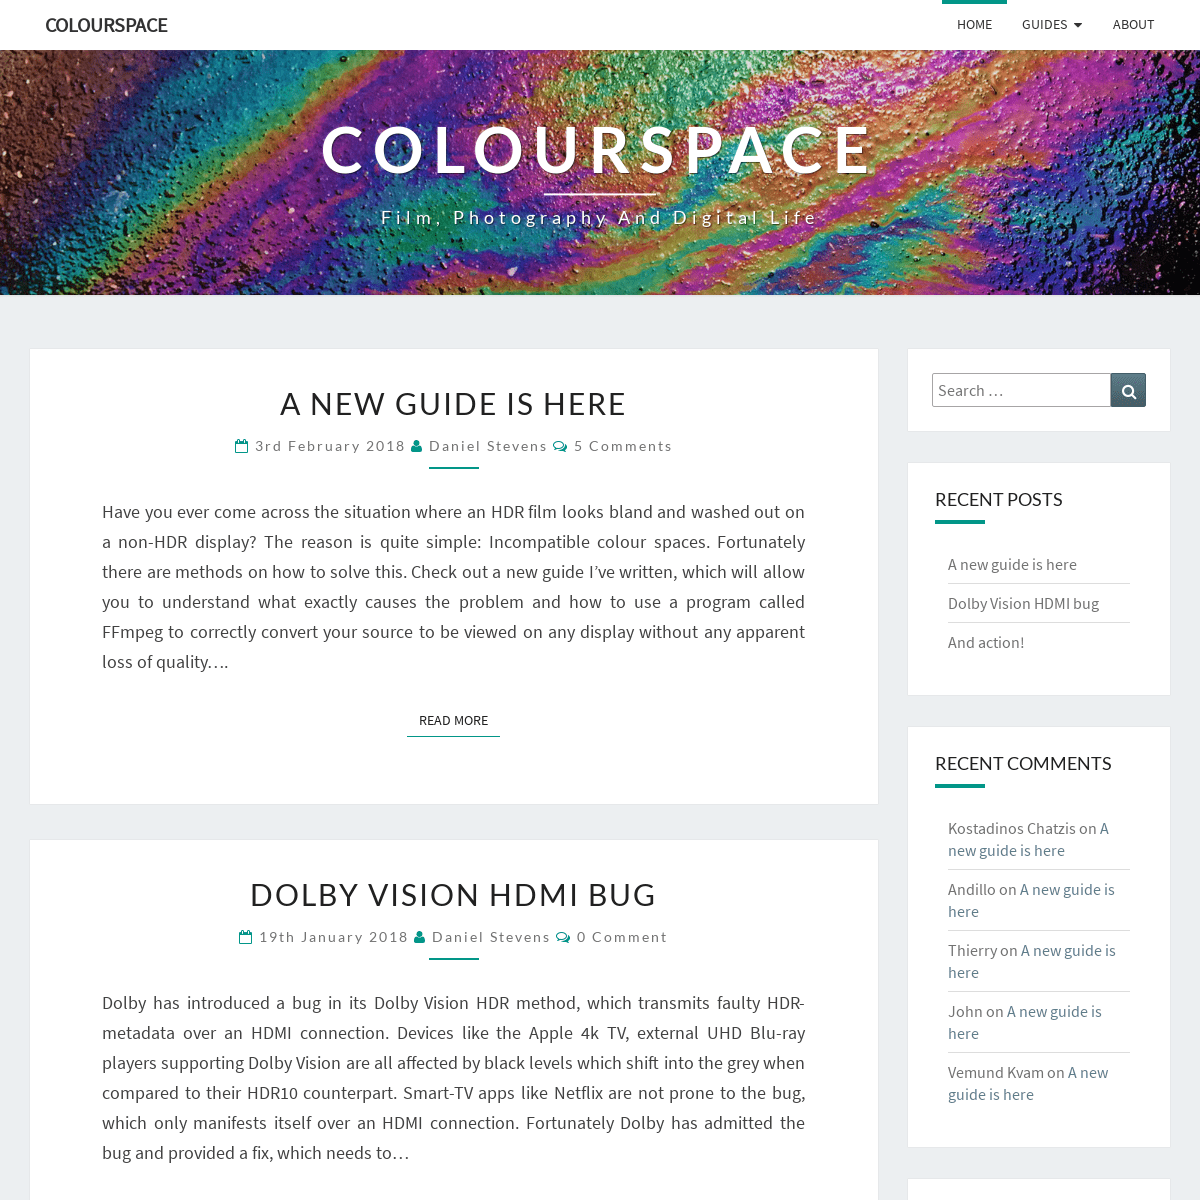 Colourspace – Film, Photography and Digital Life